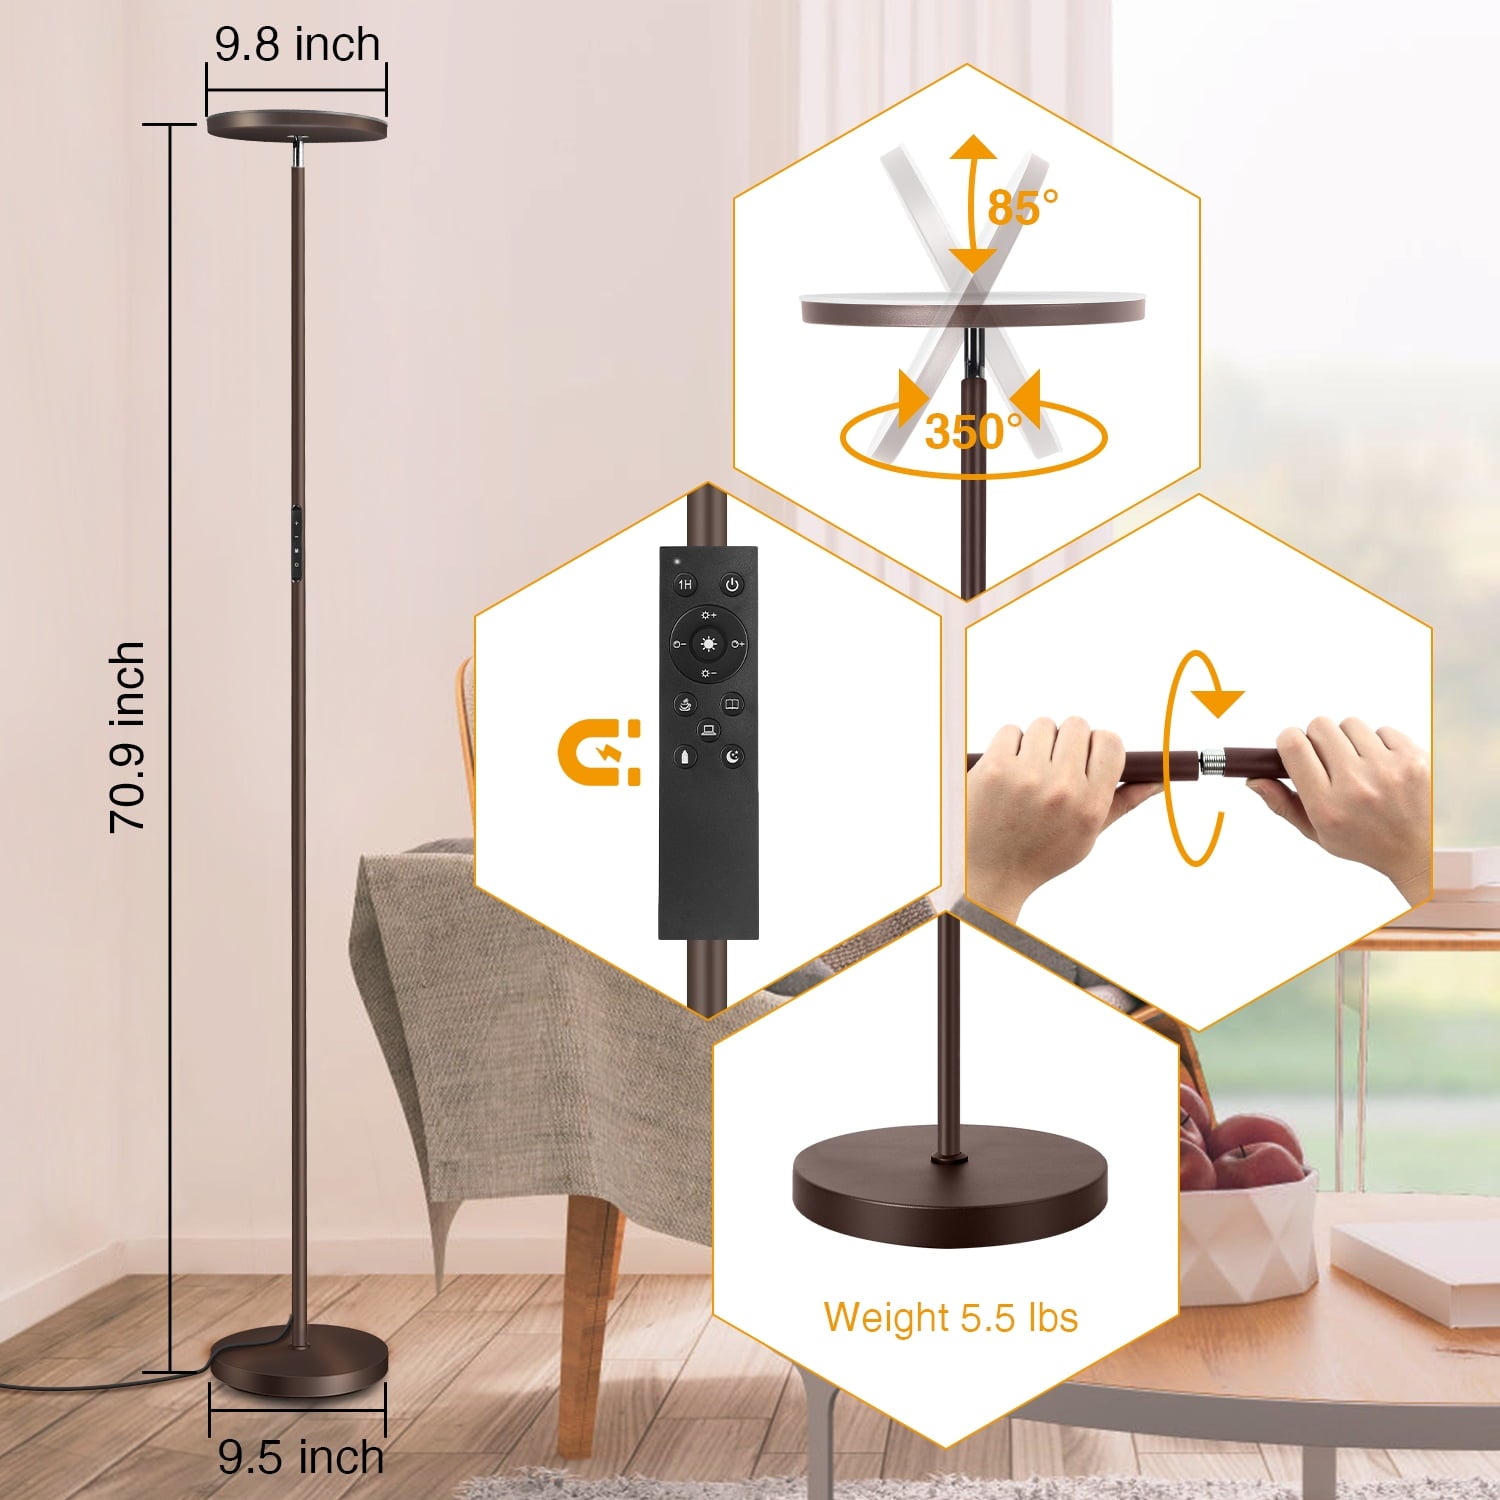 Outon LED Torchiere Floor Lamp with Remote Control Super Bright 4 Color Temperature Dimmable Lamp for Living Room, Brown